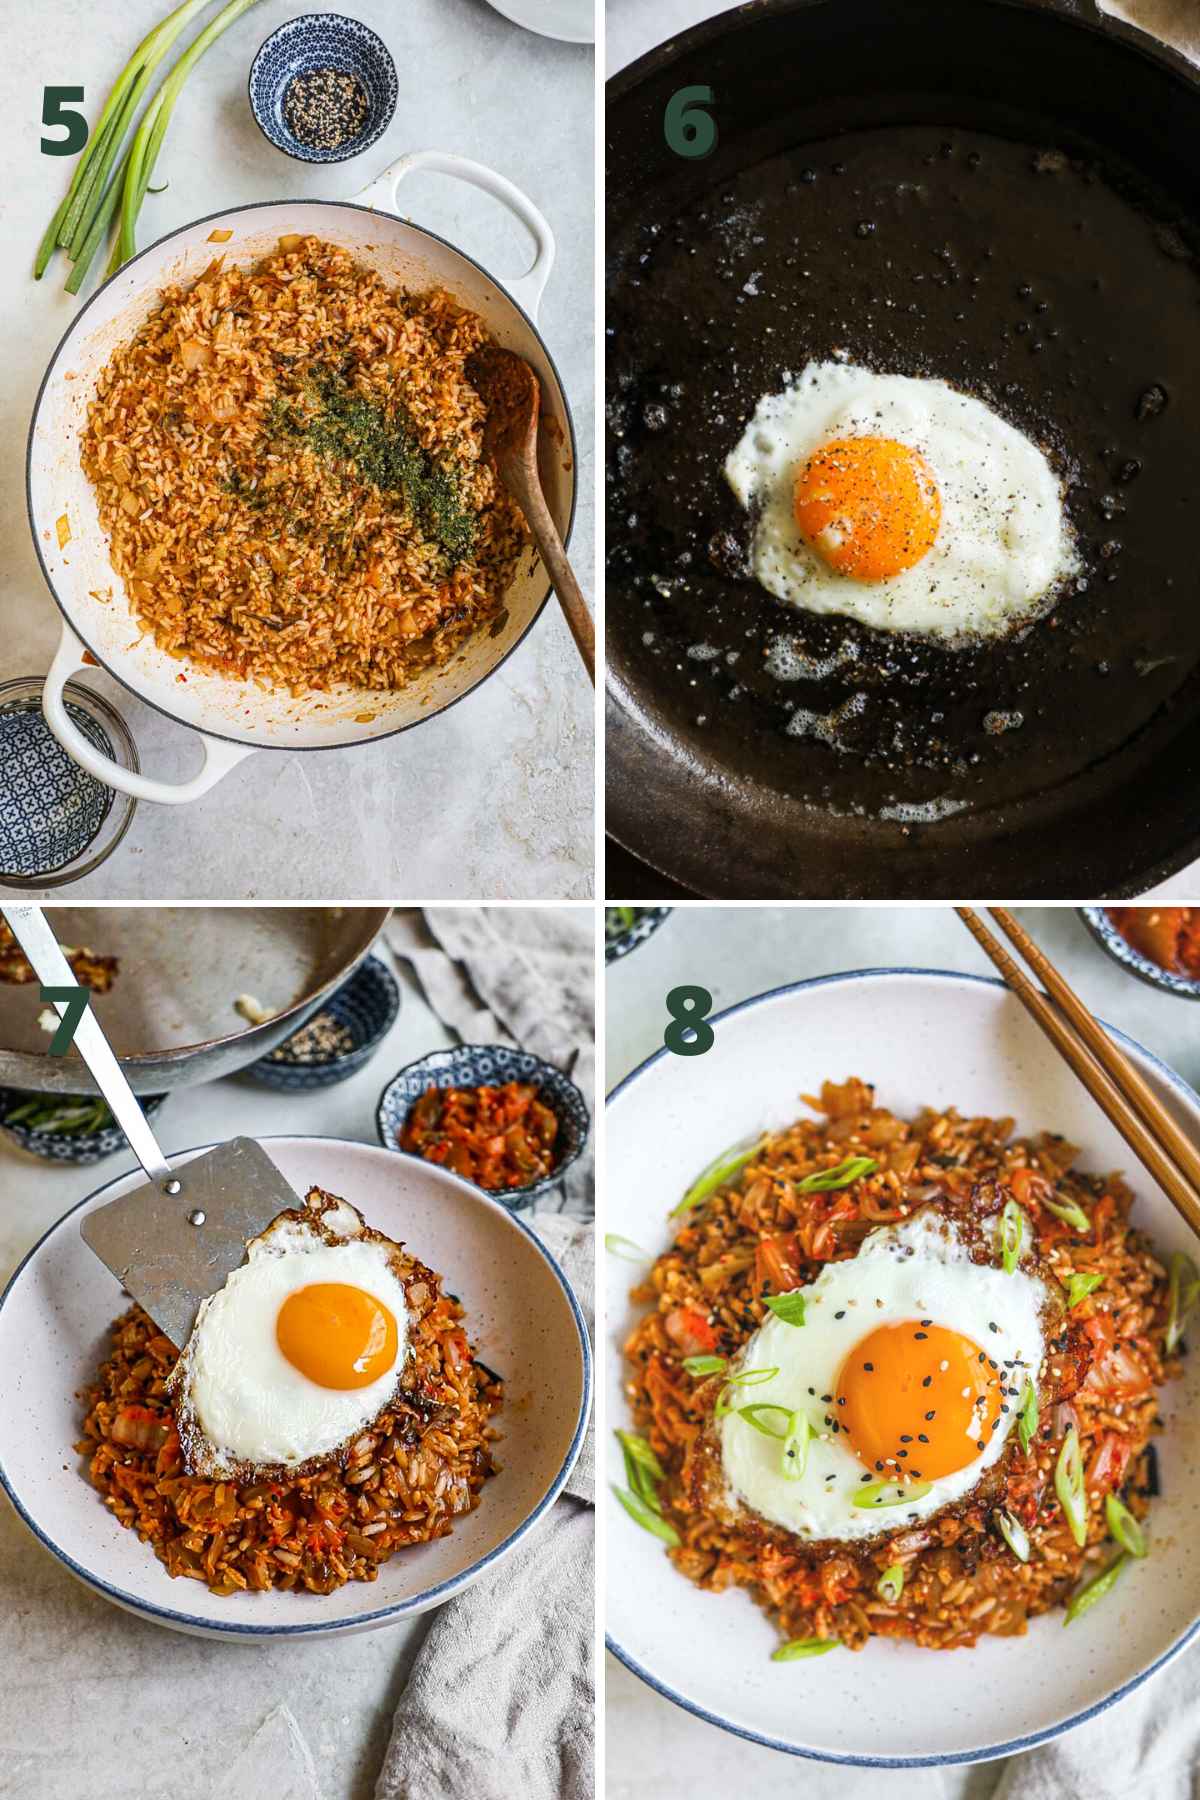 Steps to make easy kimchi fried rice, stir rice and furikake and let cook; fry egg in a skillet, top rice with egg, sesame seeds, green onions.